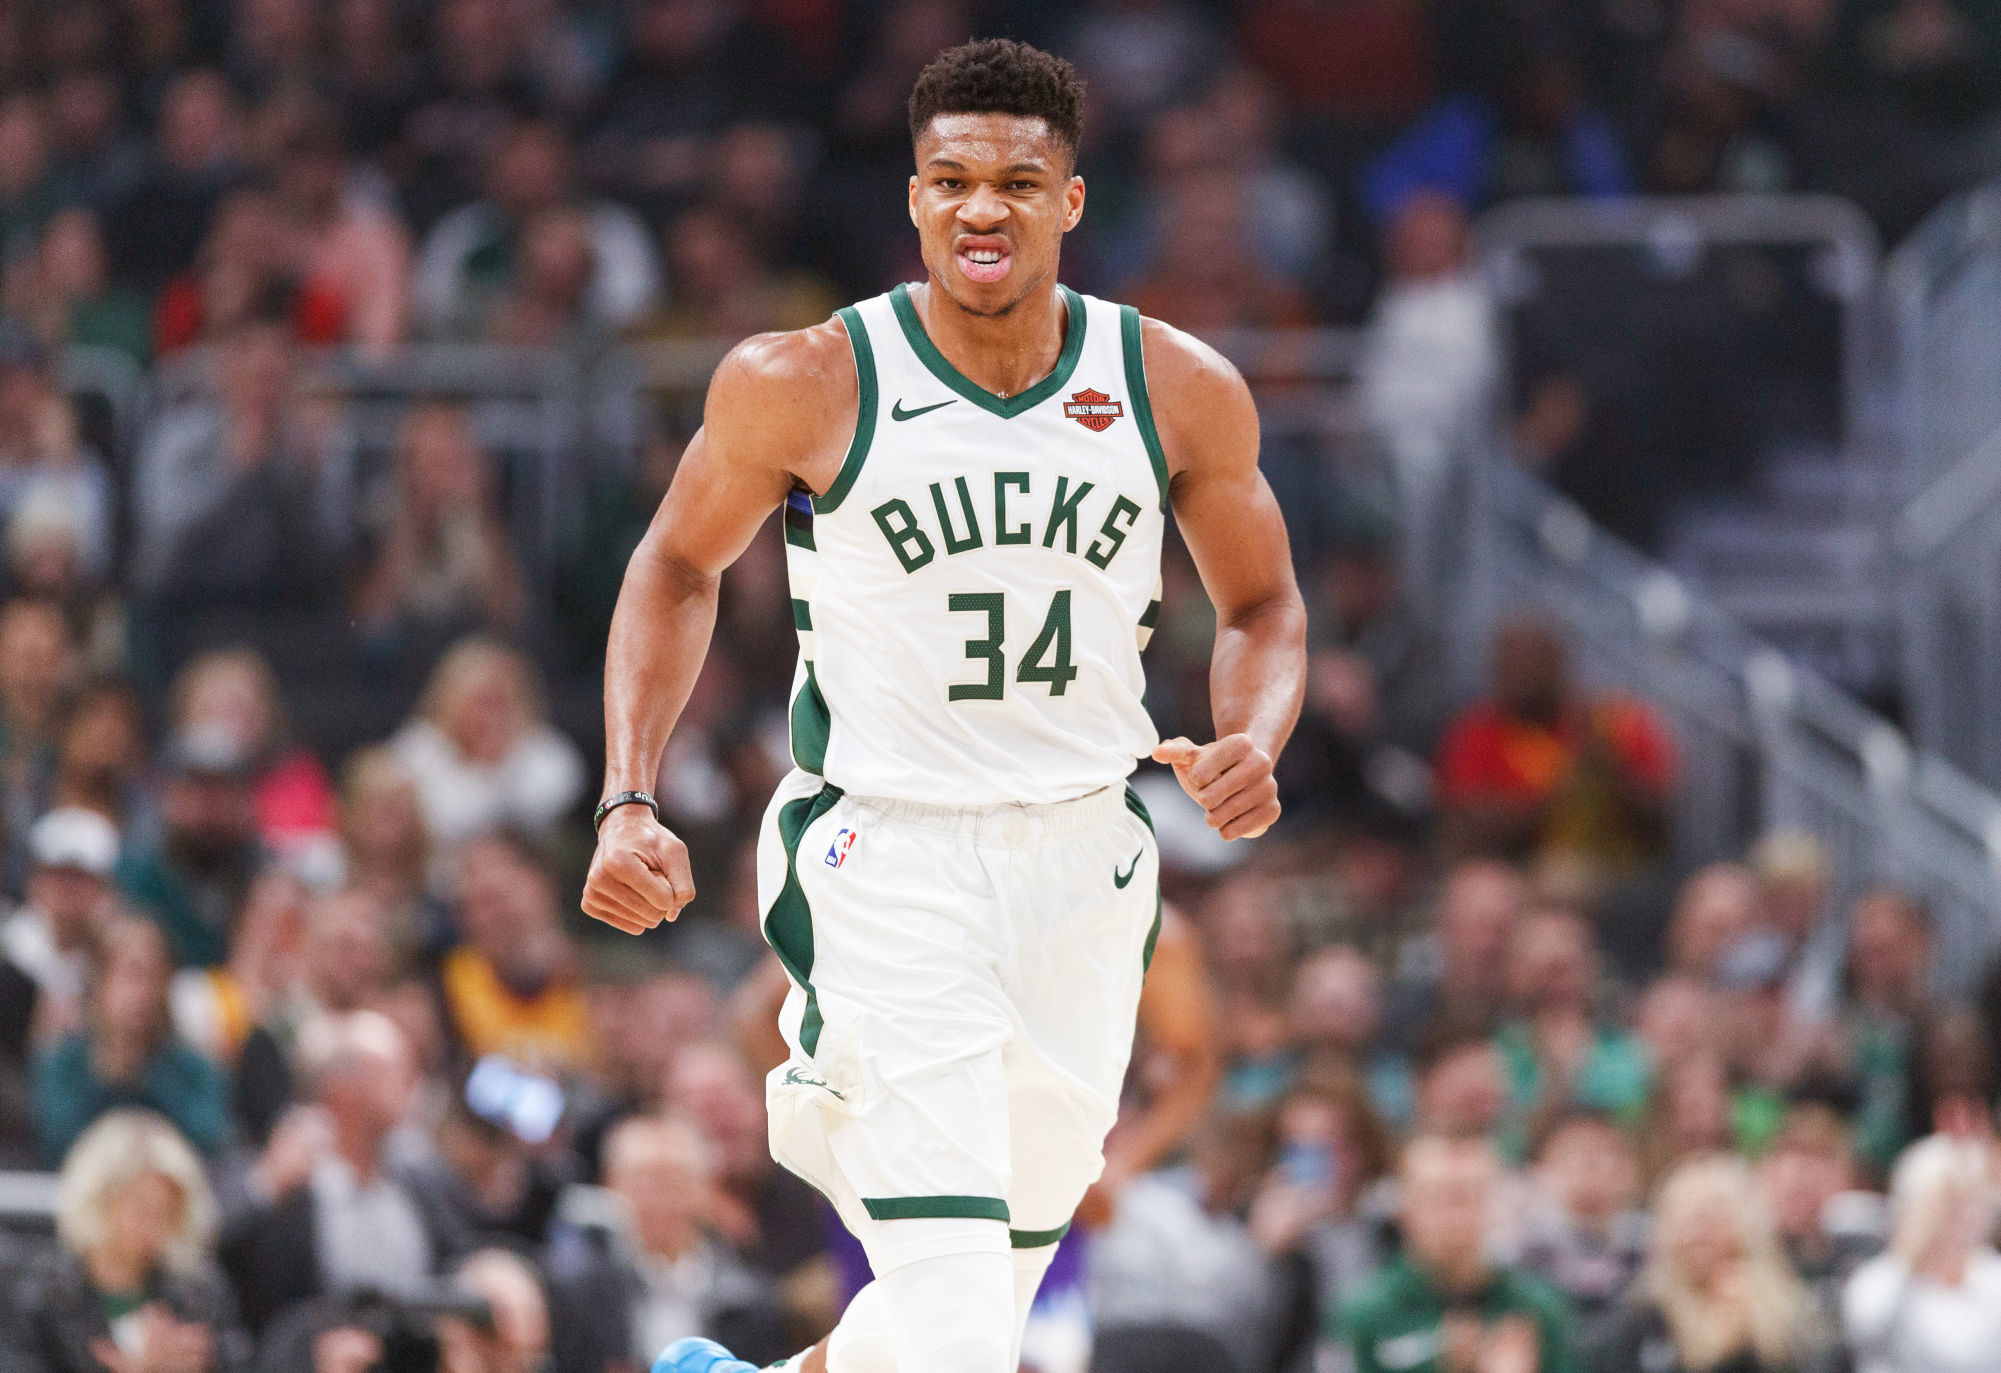 Nov 25, 2019; Milwaukee, WI, USA; Milwaukee Bucks forward Giannis Antetokounmpo (34) reacts after scoring during the first quarter against the Utah Jazz at Fiserv Forum. Mandatory Credit: Jeff Hanisch-USA TODAY Sports/Sipa USA 

Photo by Icon Sport - Giannis ANTETOKOUNMPO - Fiserv Forum - Milwaukee (Etats Unis)